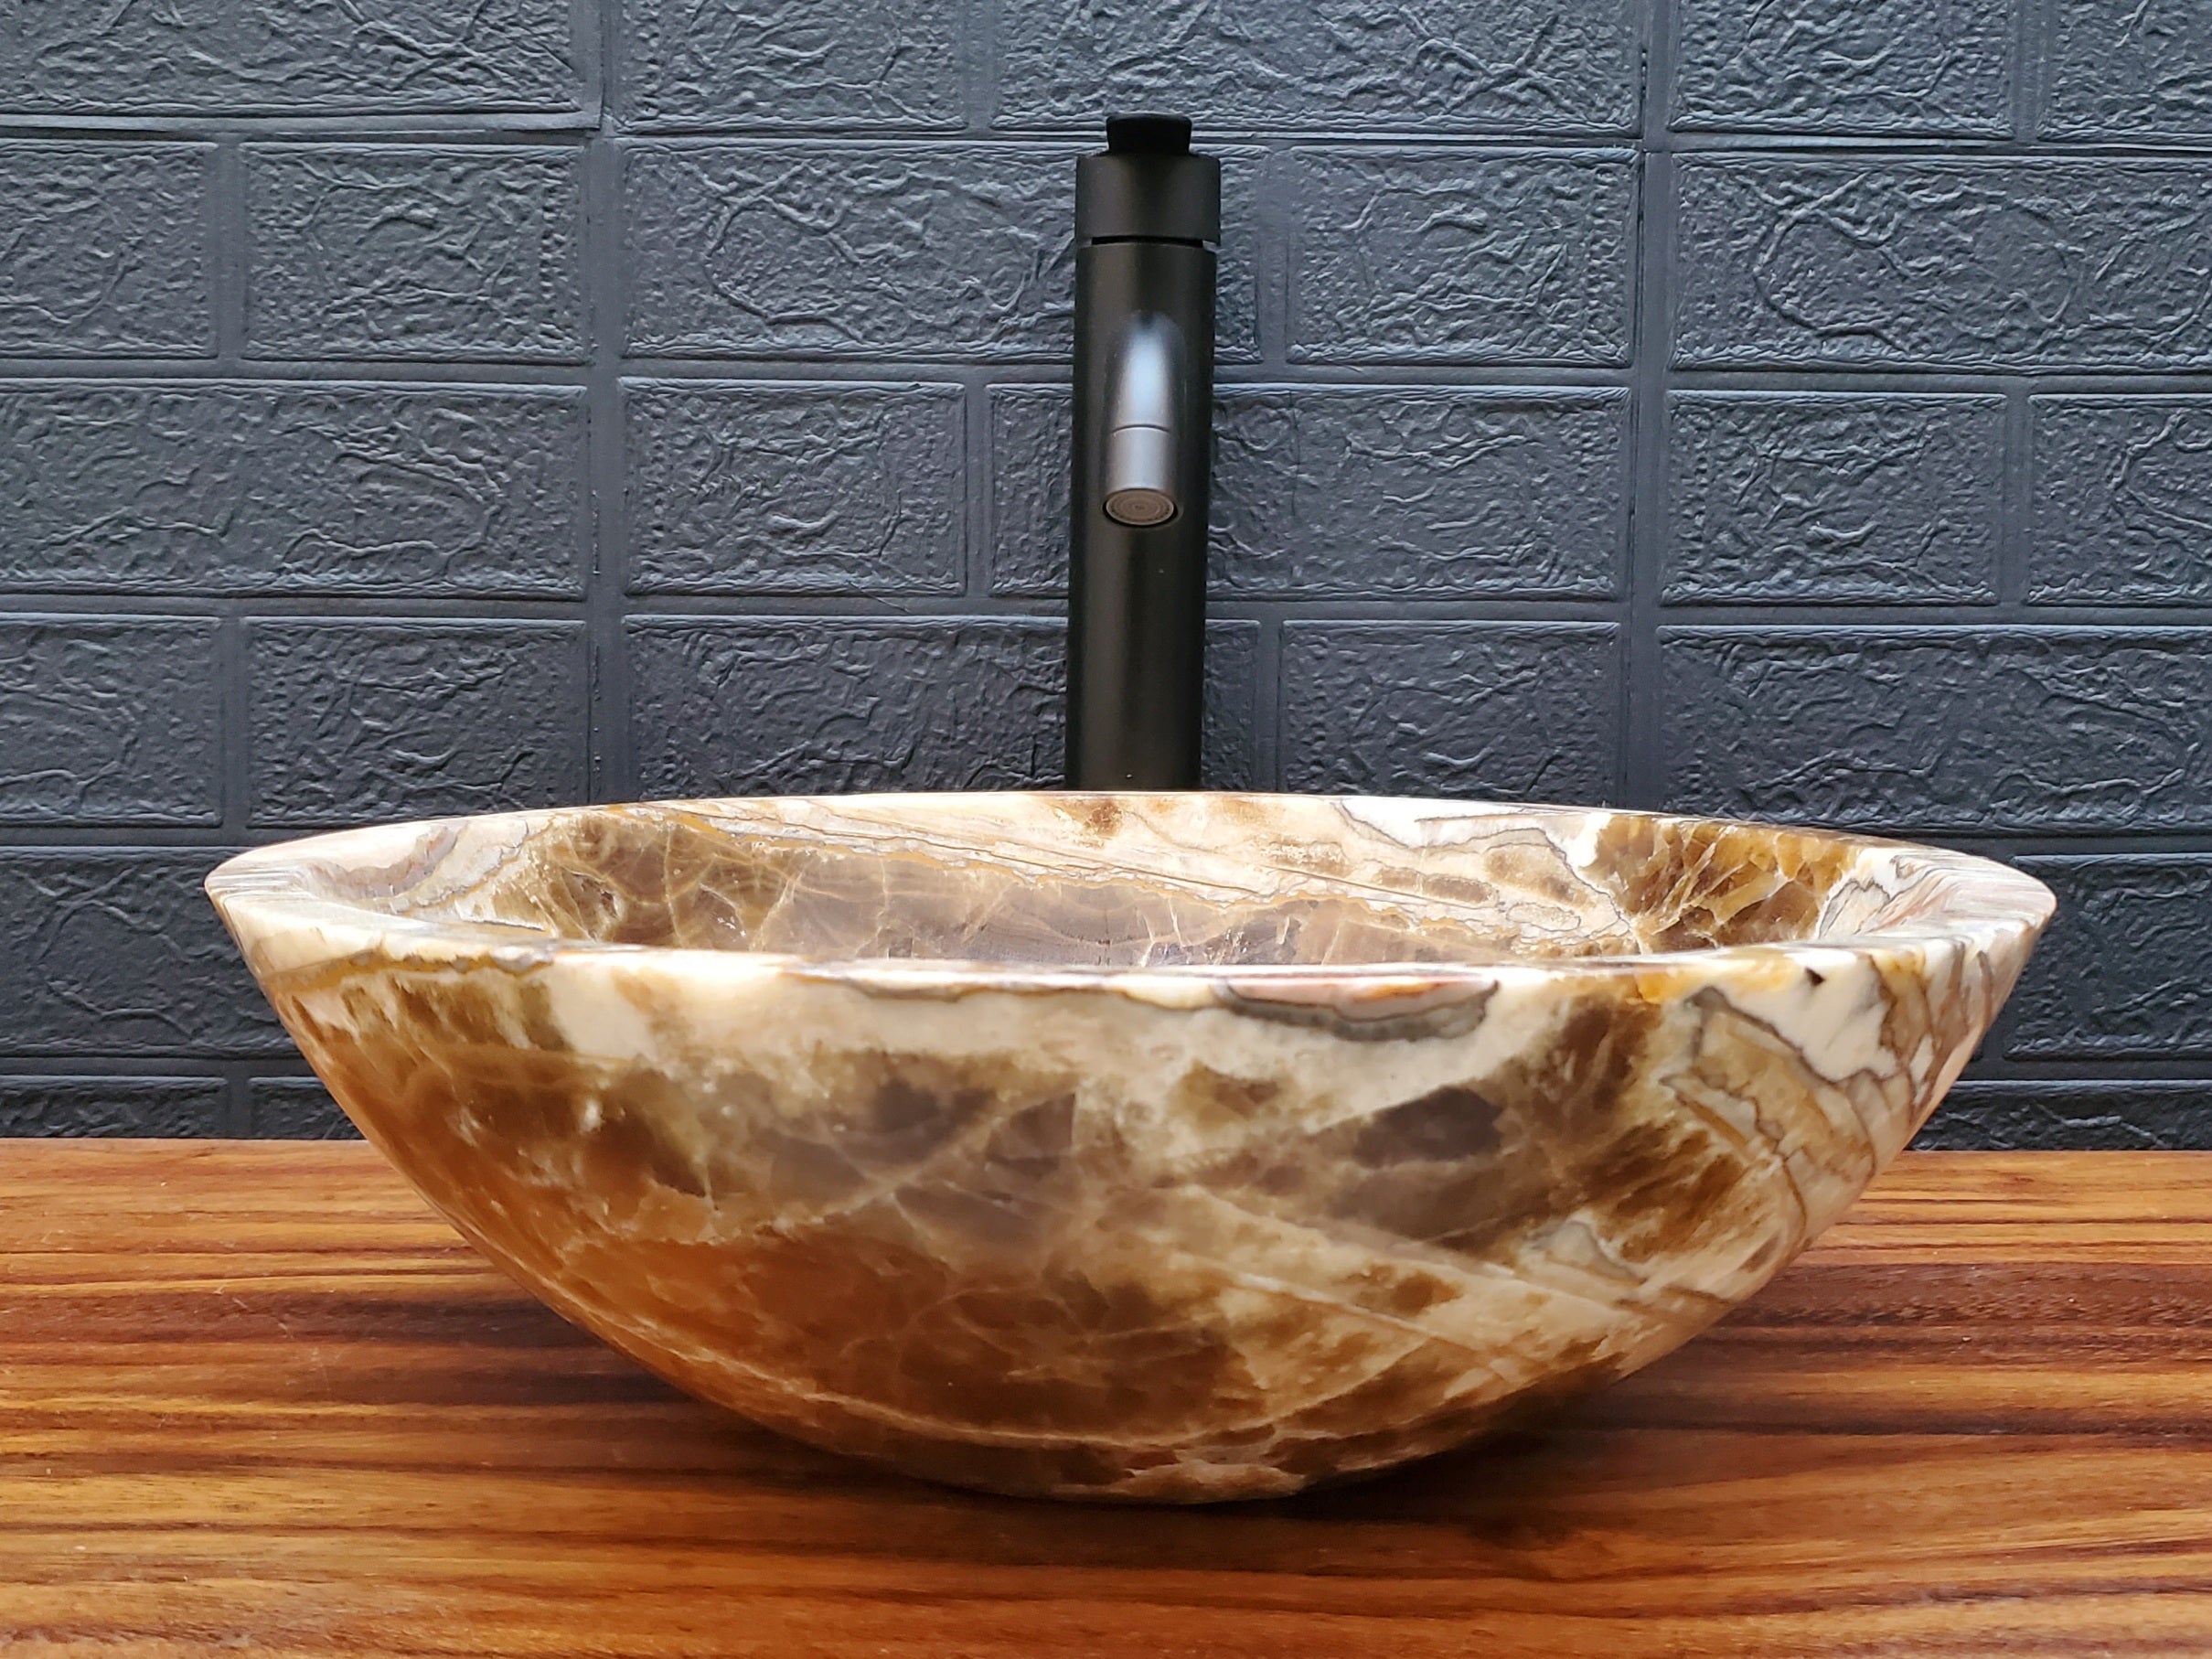 Brown and White Round Onyx Stone Bathroom Vessel Sink, Above Counter Sink, Handmade in Mexico. Hand Finished in USA. Buy now at www.felipeandgrace.com. 